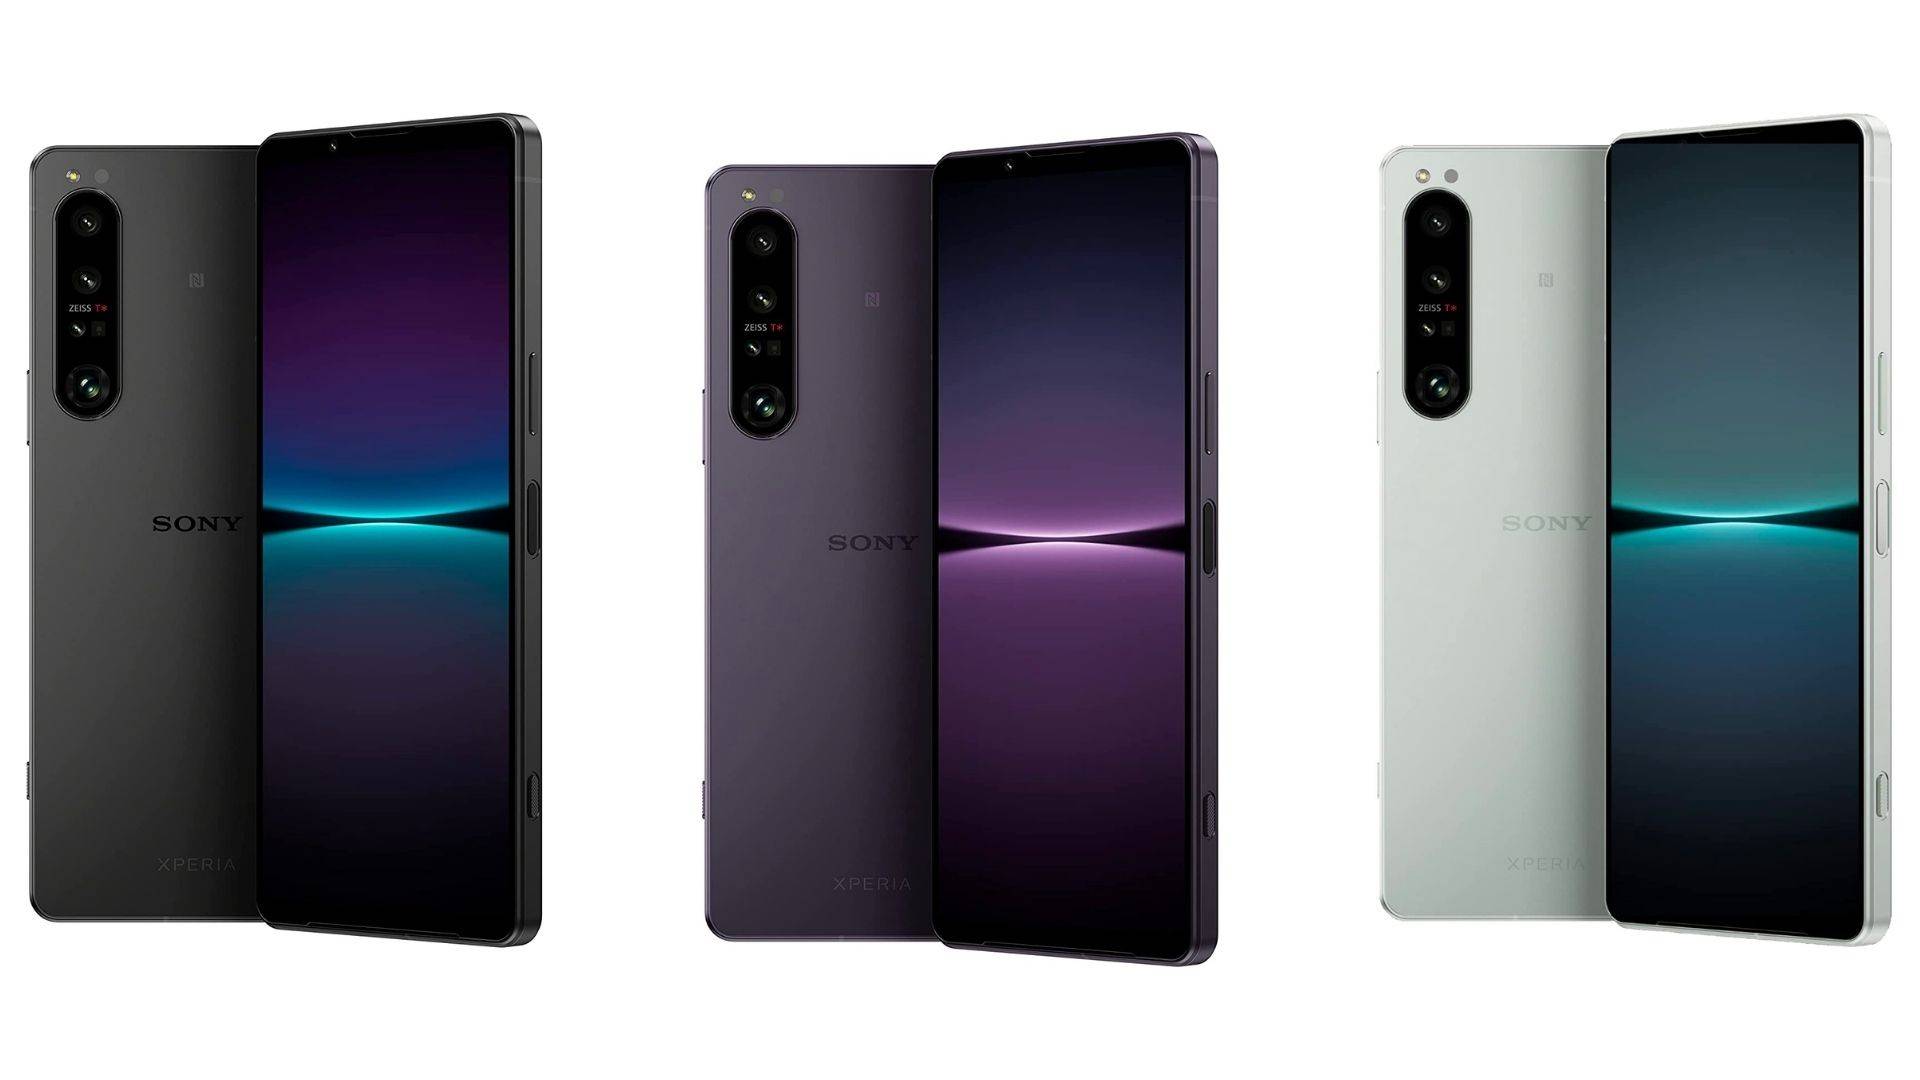 Sony Xperia 1 IV in Black, Violet and White colors